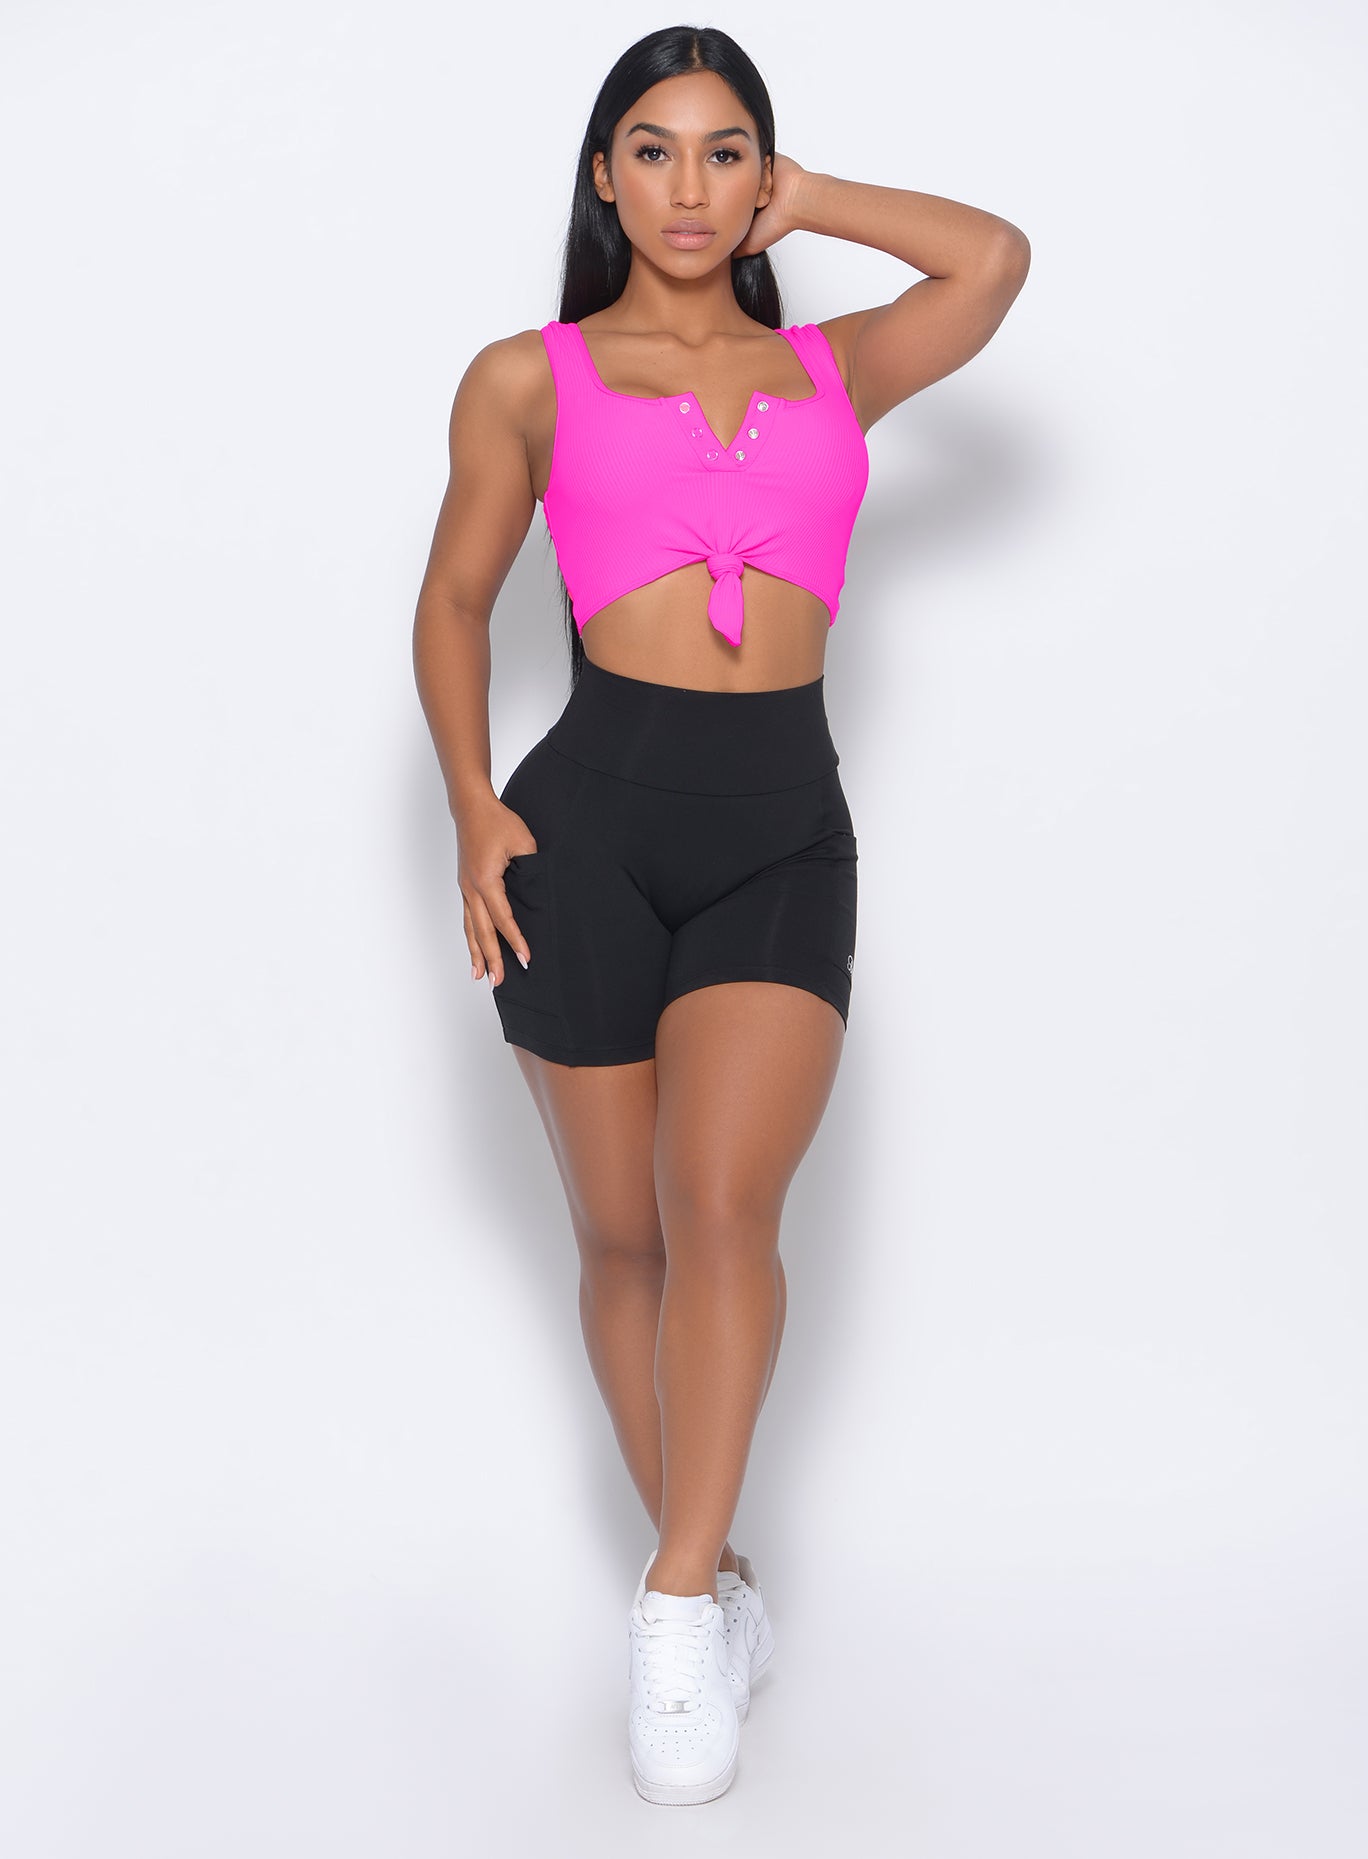 Front profile picture of the model wearing our black pocket biker shorts and a neon pink bra